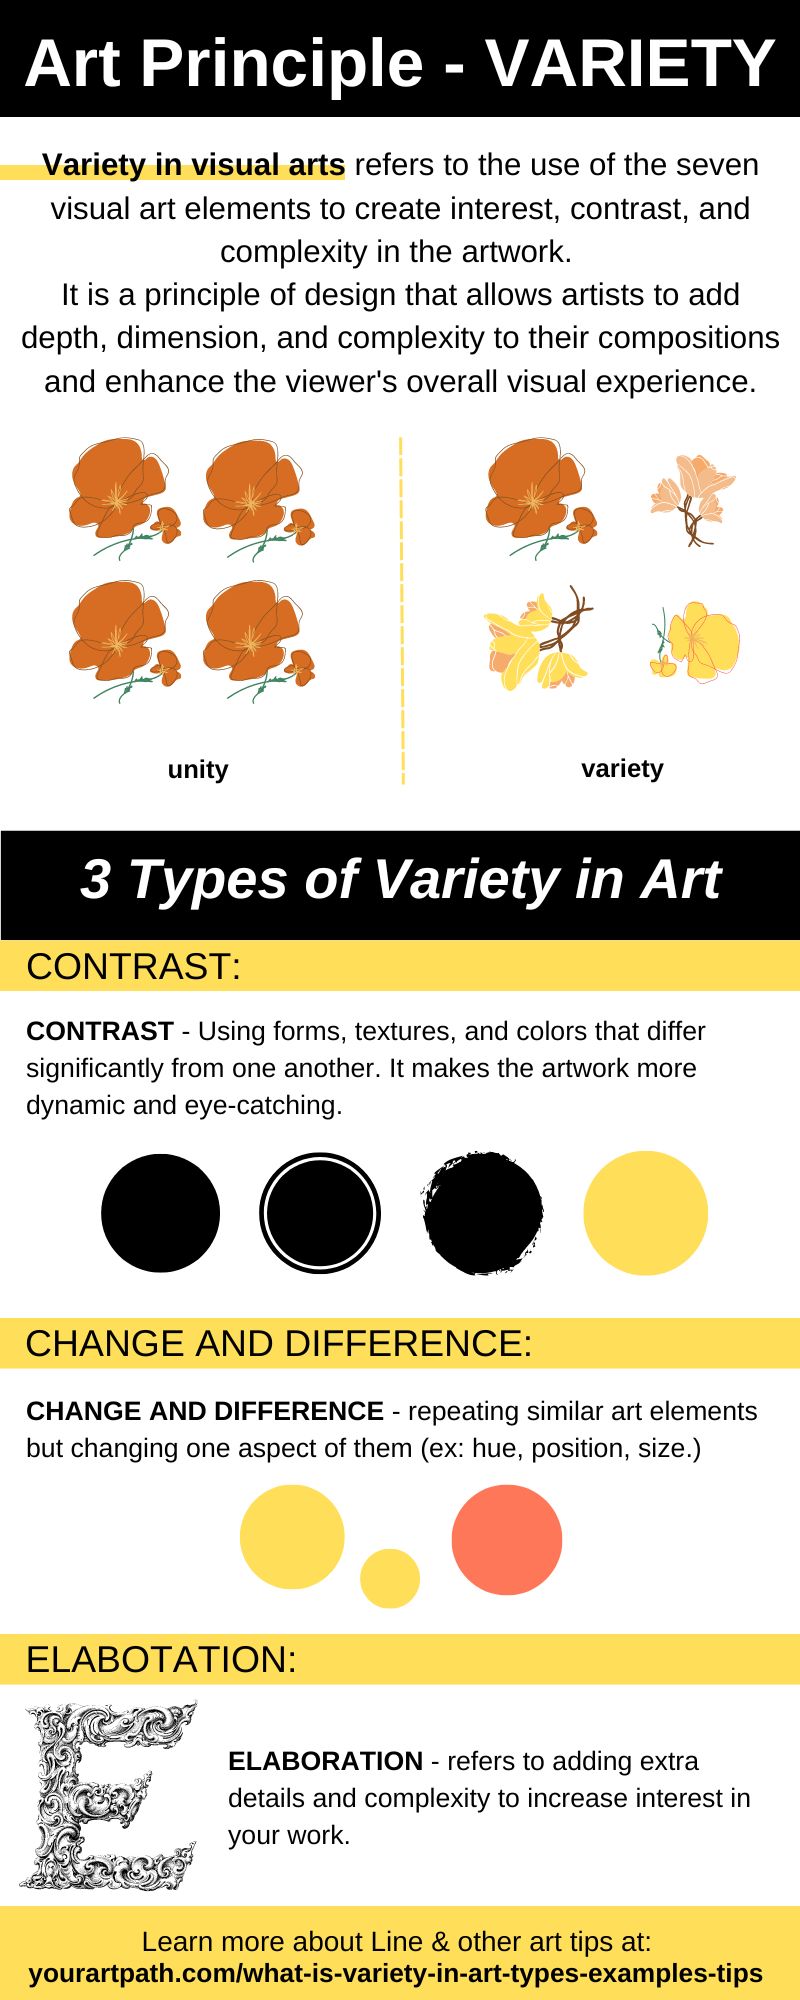 unity and variety in art